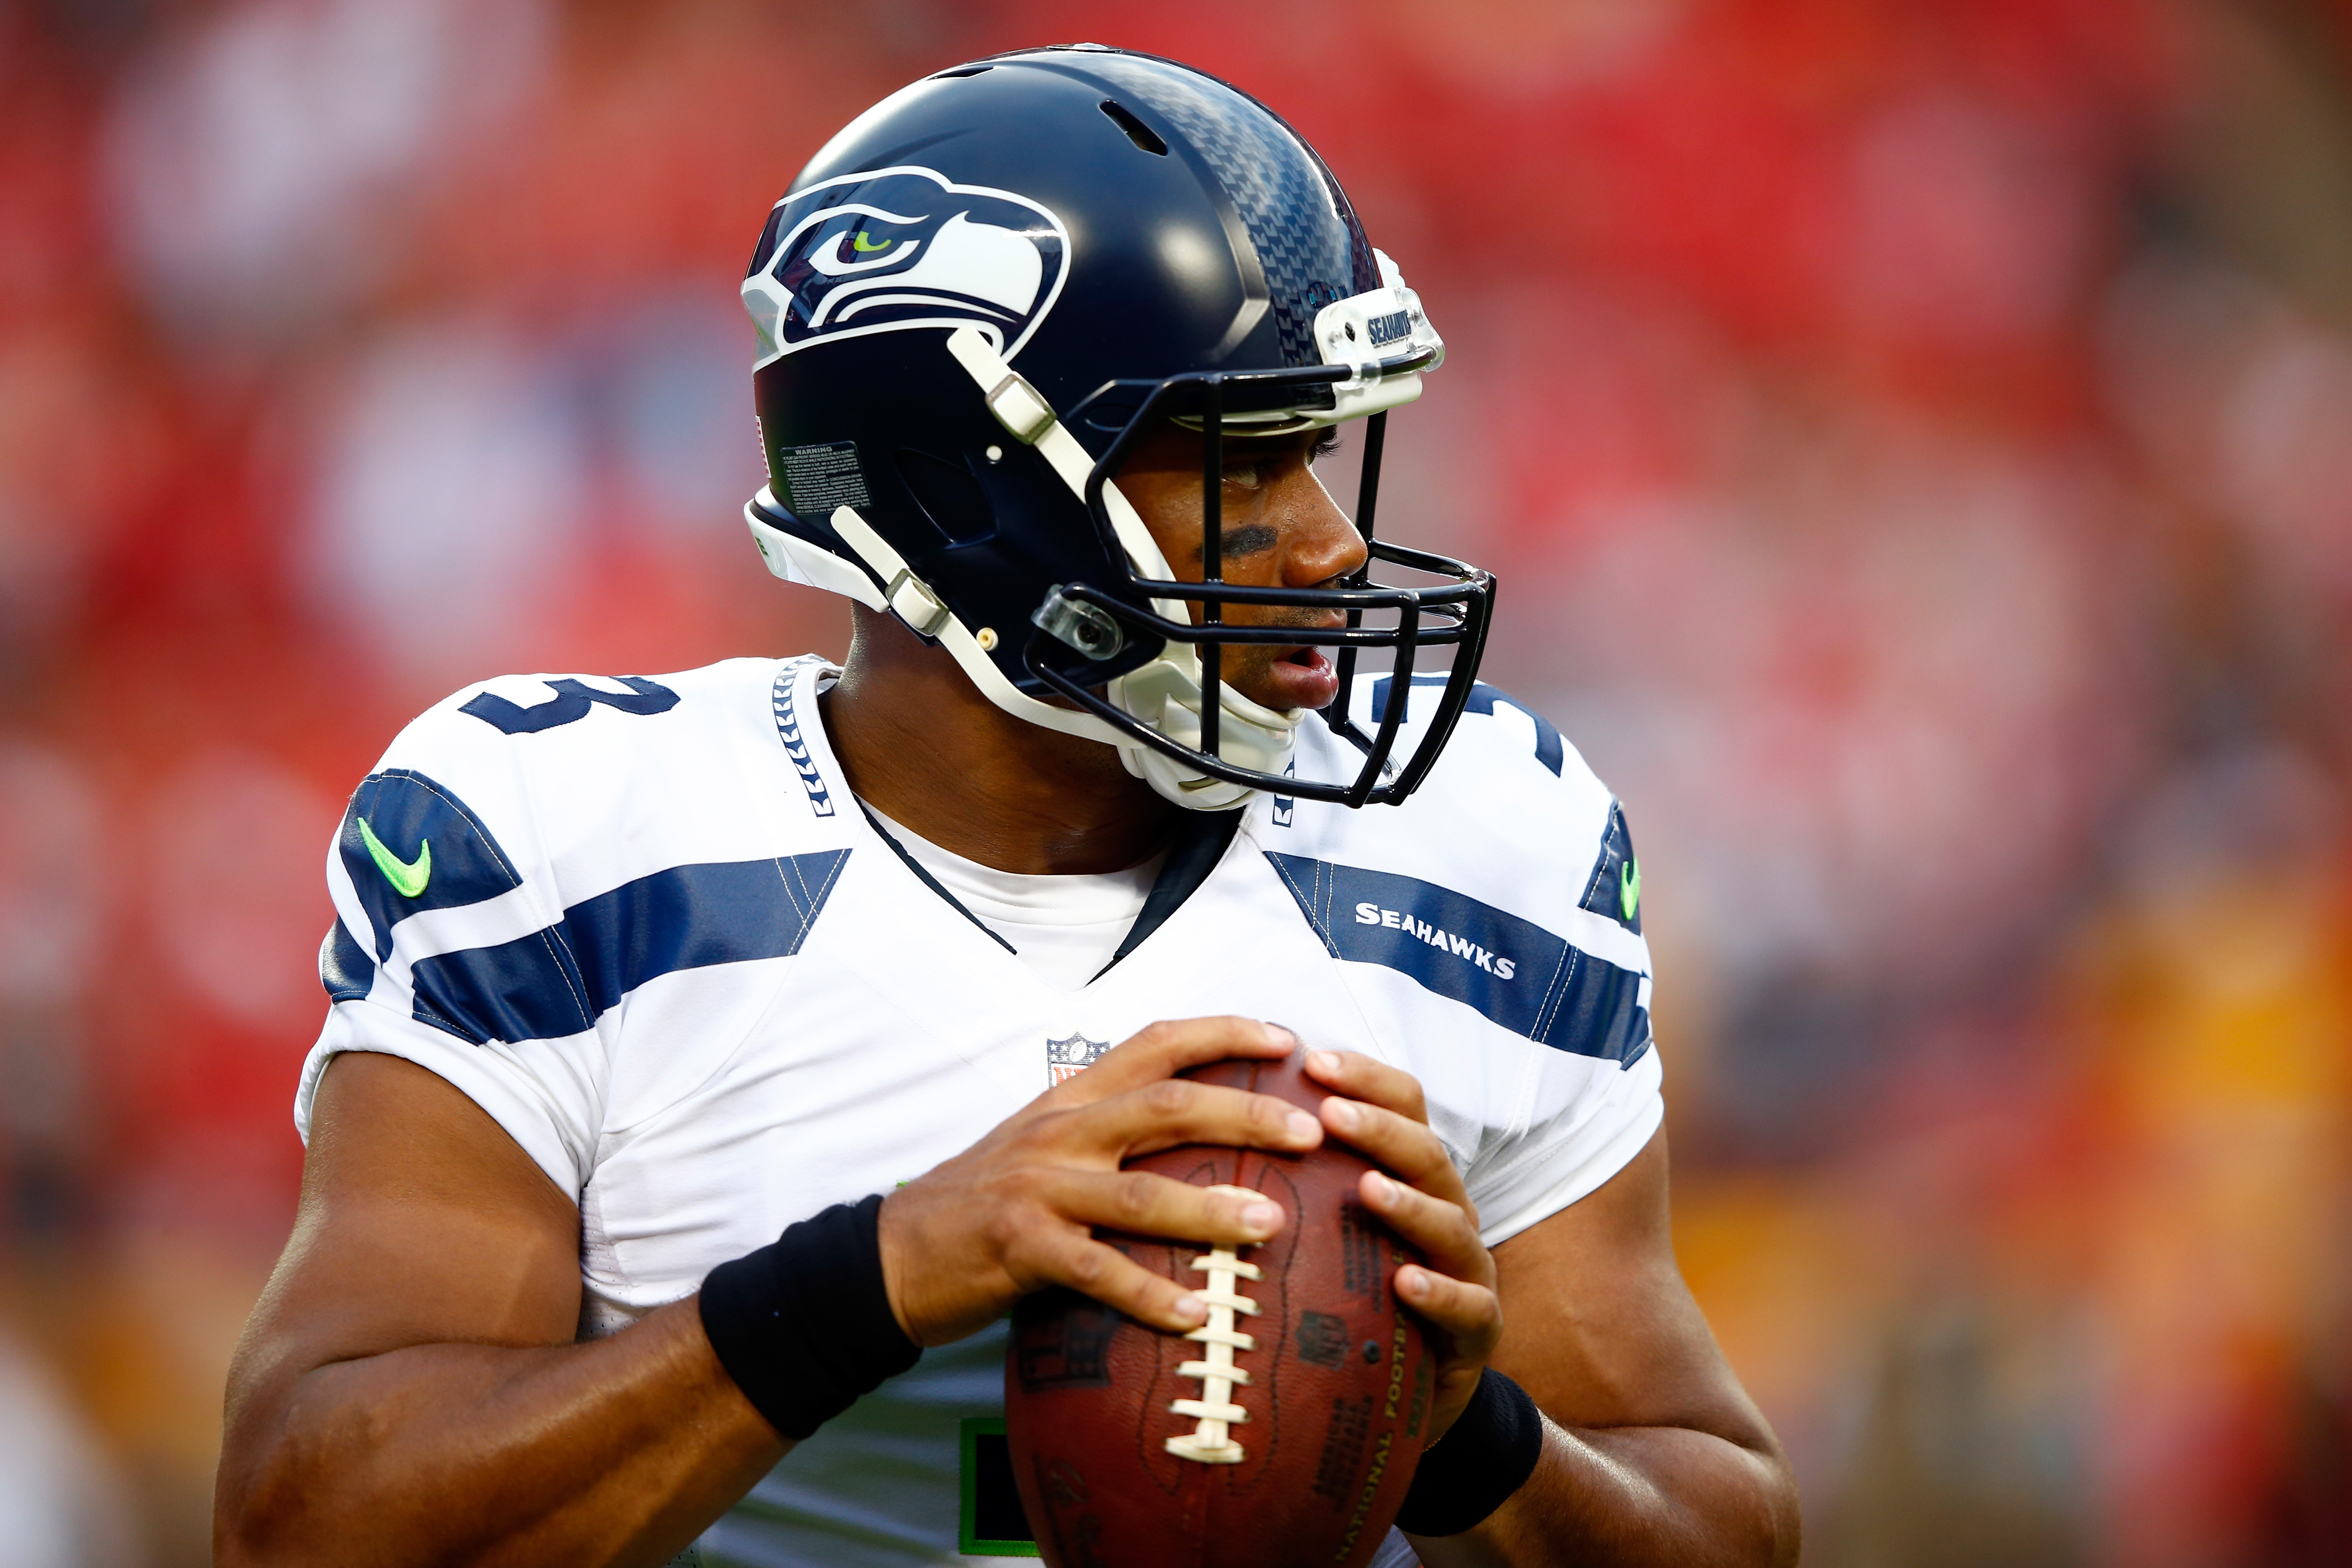 KANSAS CITY, MO - AUGUST 21: Quarterback Russell Wilson #3 of the Seattle Seahawks warms up prior to the preaseason game against the Kansas City Chiefs at Arrowhead Stadium on August 21, 2015 in Kansas City, Missouri.